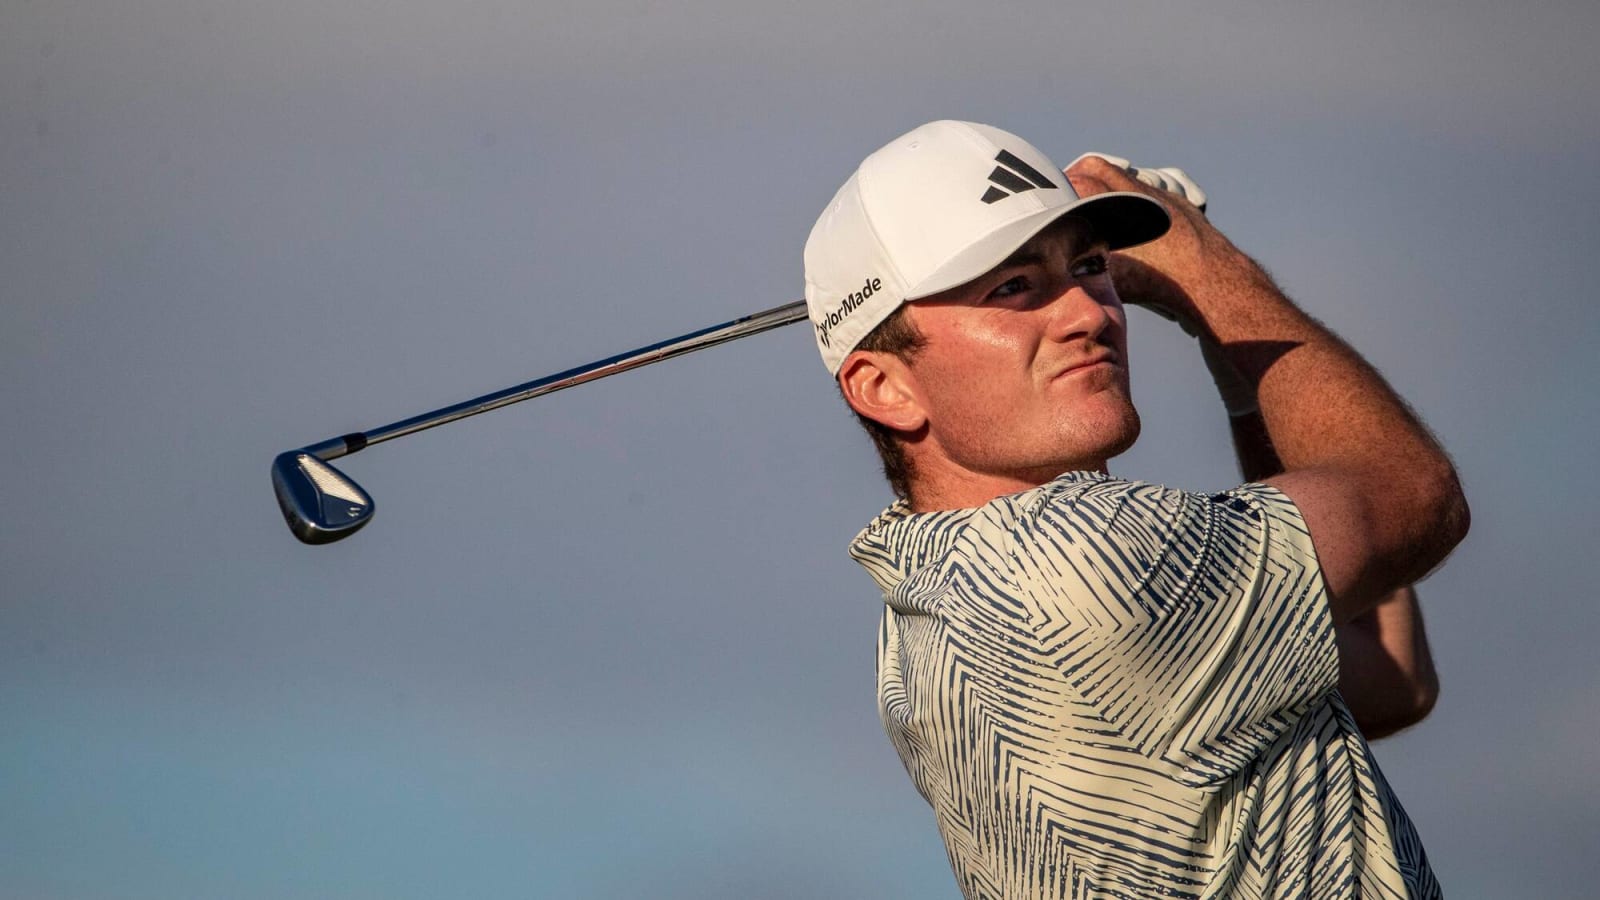 PGA Tour: What to know about amateur Nick Dunlap before you bet on him